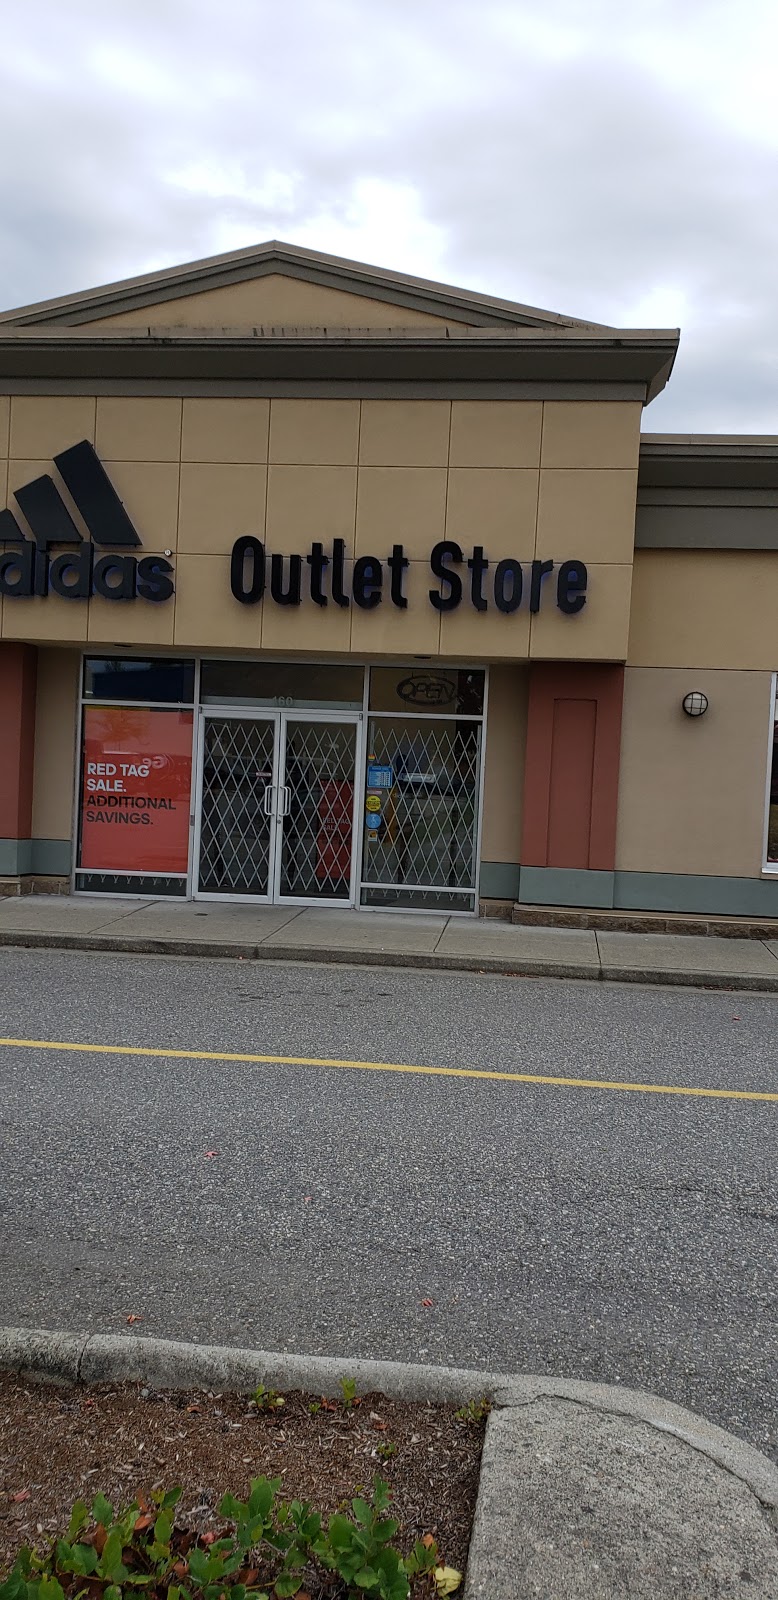 langley adidas outlet store hours